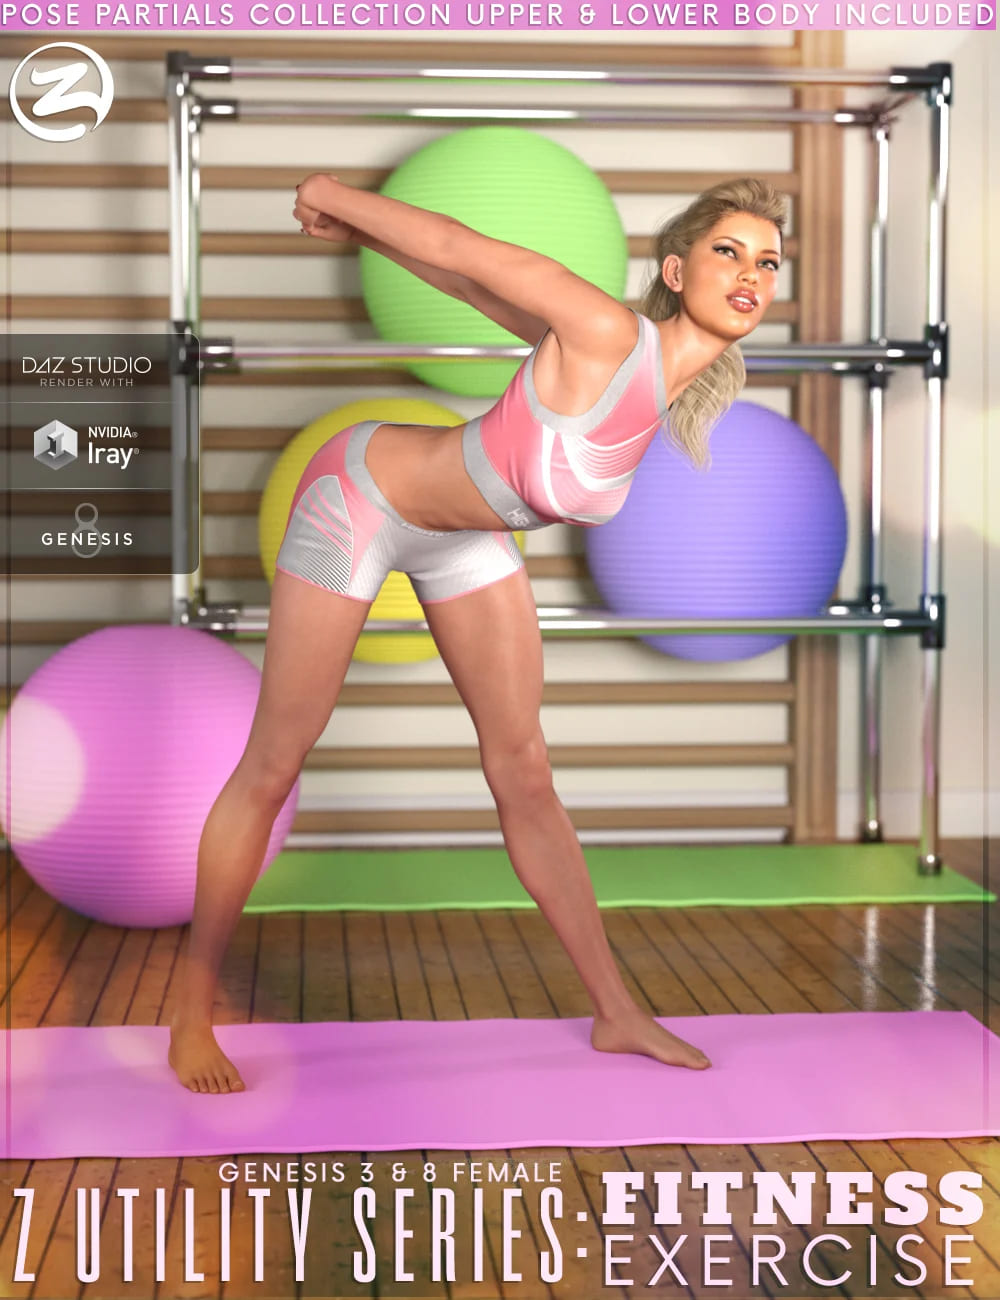 Z Utility Series : Fitness Exercise – Poses and Partials for Genesis 3 and 8 Female_DAZ3DDL